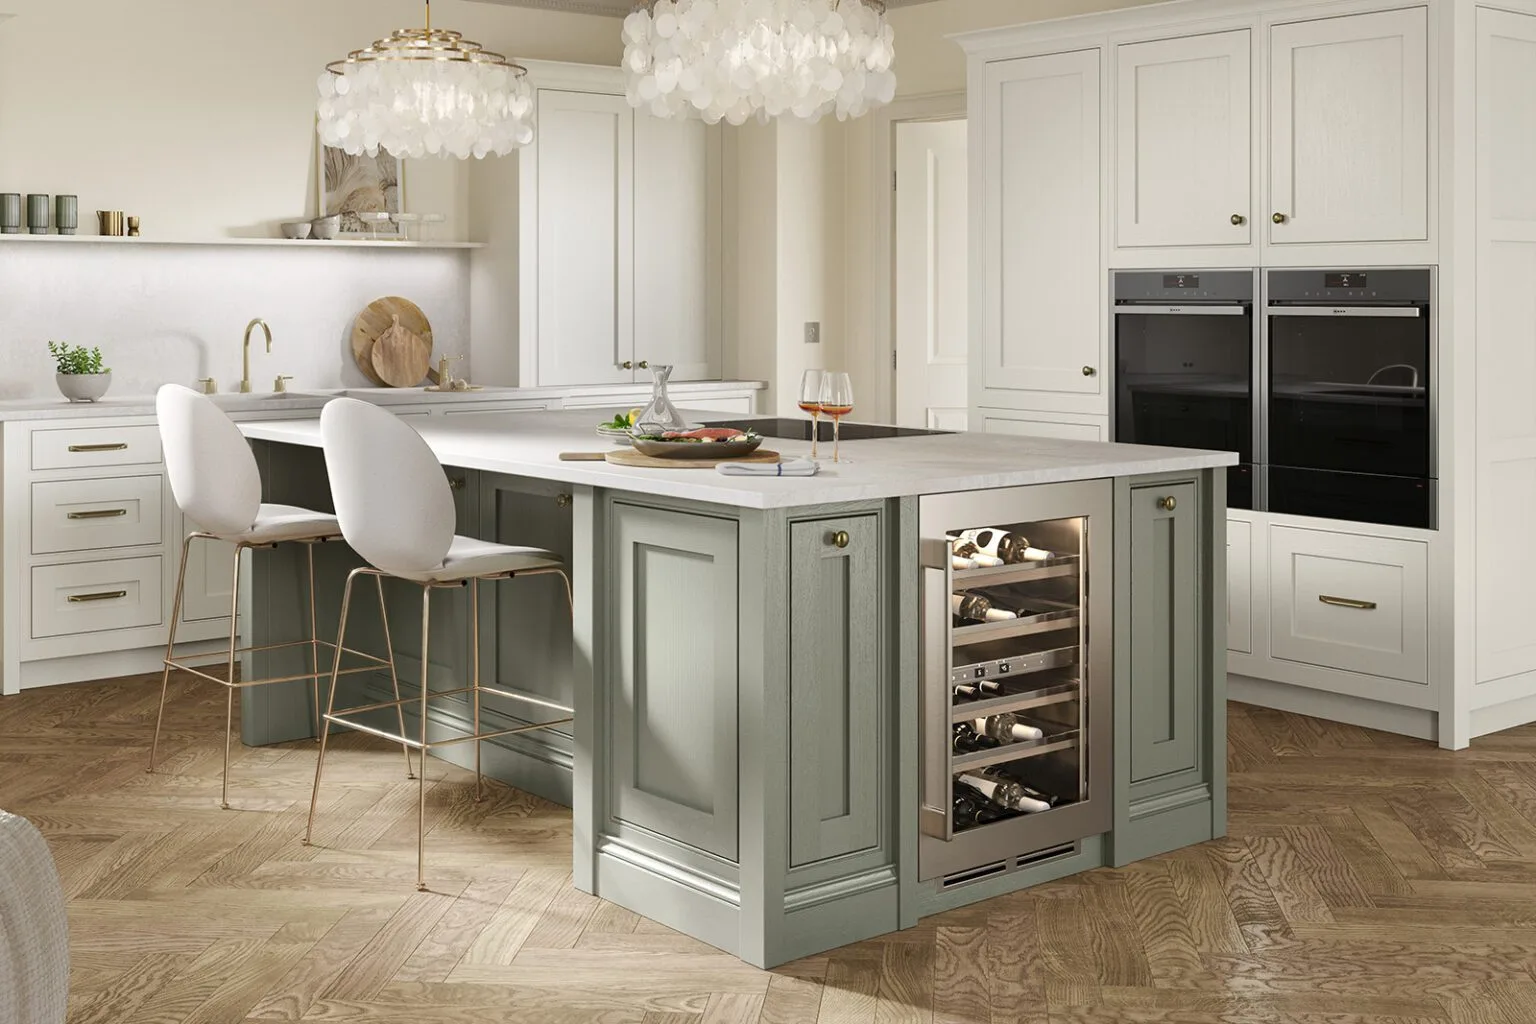 Second Nature Light Shaker Kitchen With Island 1536x1024